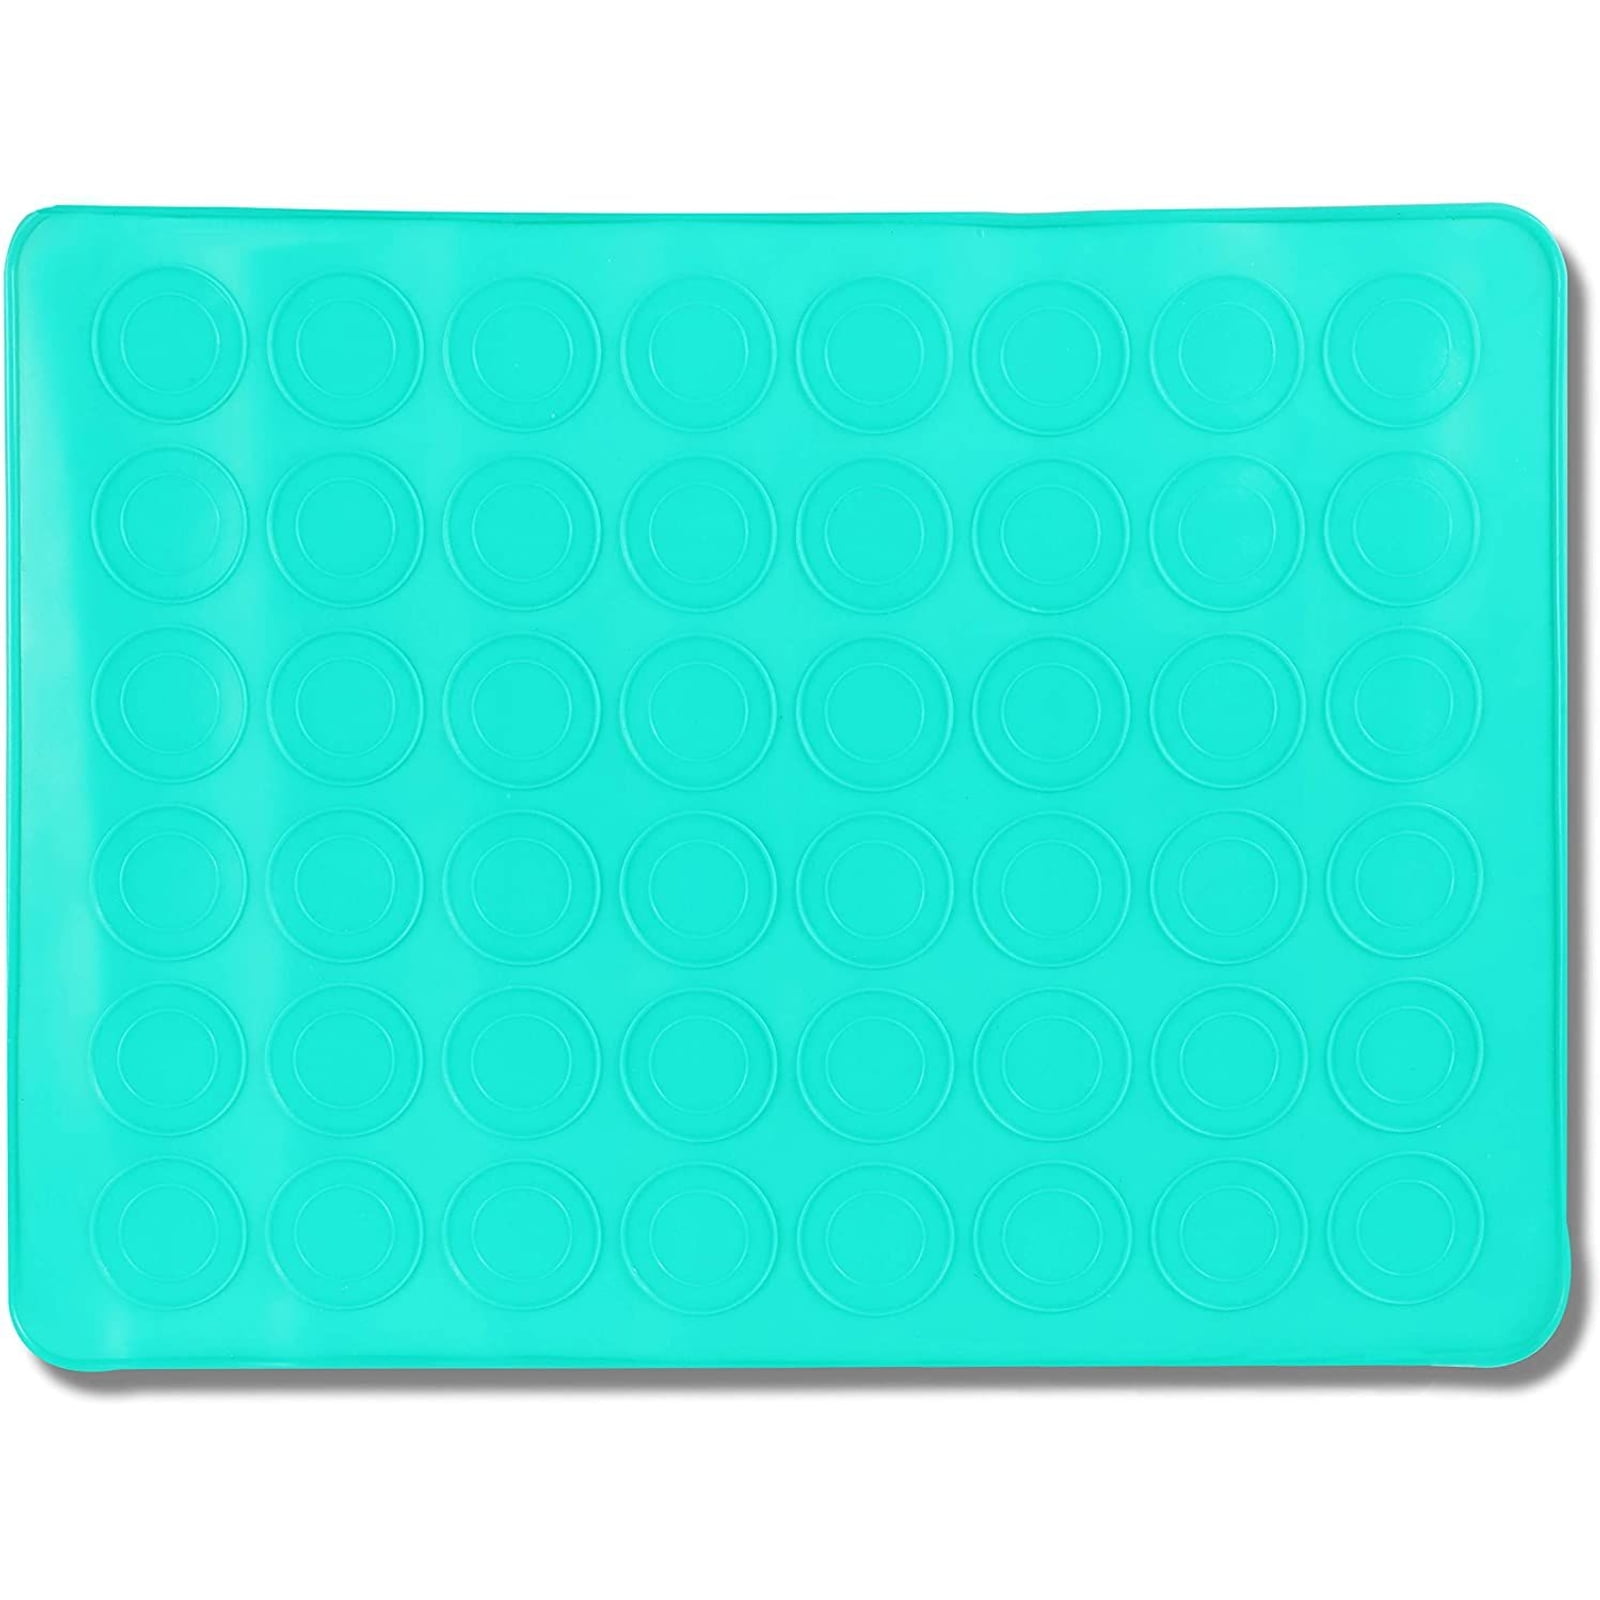 Details about   Non Stick Baking Mat Silicone Pastry For Cake Professional Macaron Cookie 